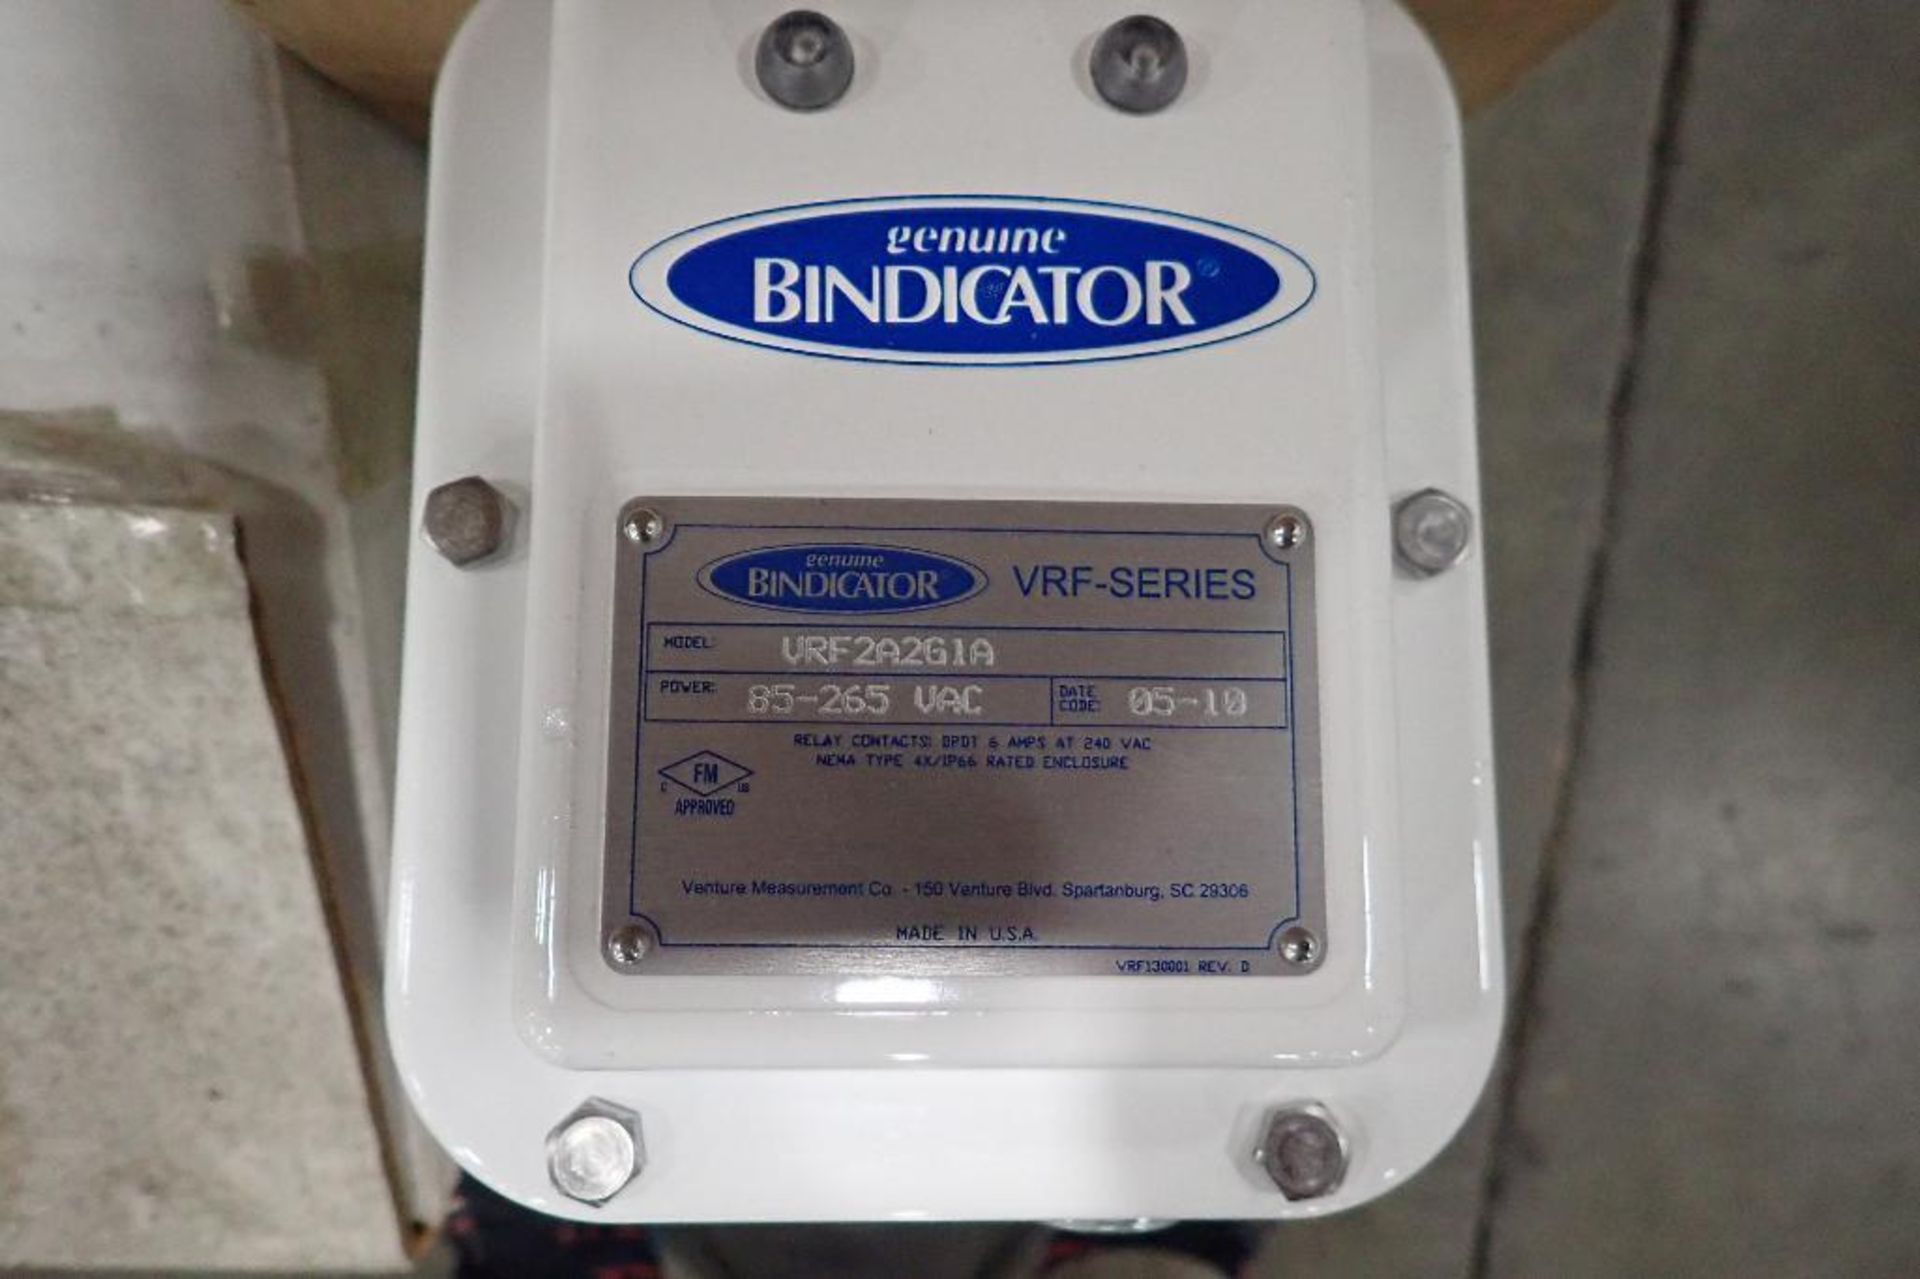 2010 Bindicator, Model VRF2A2G1A, unused. **Rigging Fee: $25** (Located in 3703 - Eagan, MN.) - Image 3 of 4